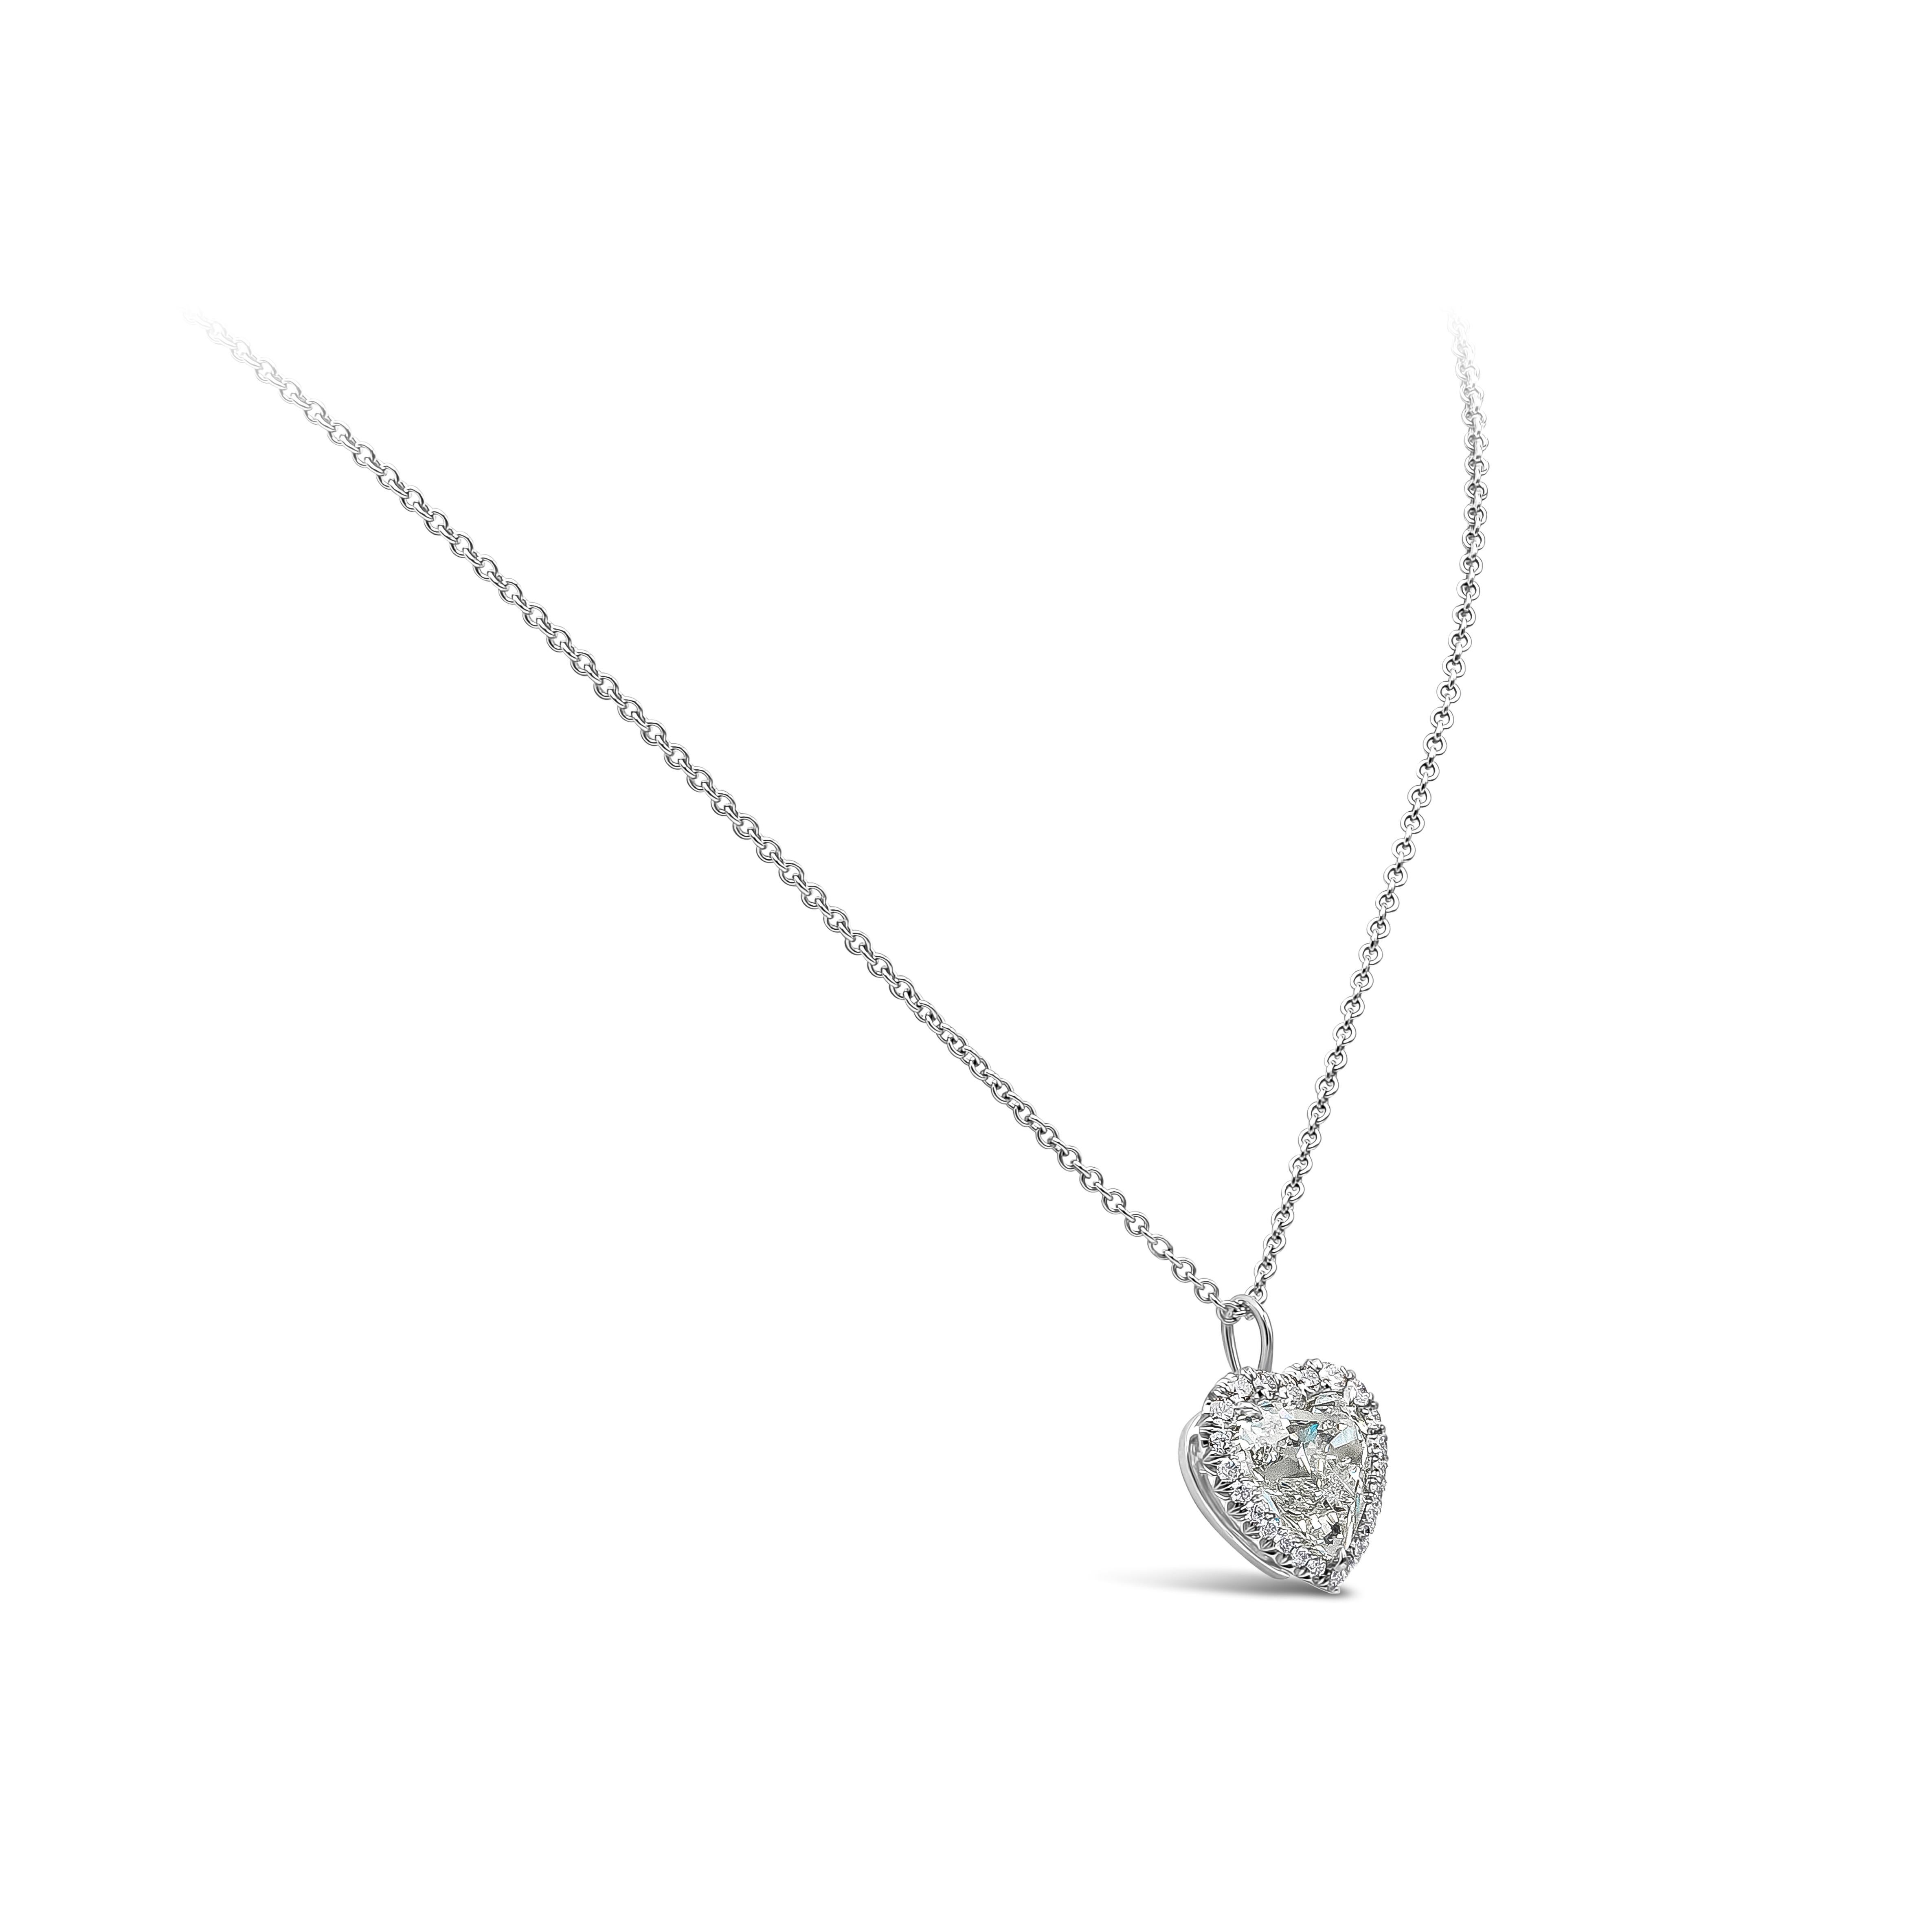 A unique and versatile halo pendant necklace showcasing a 5.01 carat heart shape diamond certified by GIA as H color, VS2 clarity. Surrounding the center diamond is a row of 27 pieces of round brilliant diamonds weighing 0.45 carats total, GH color,